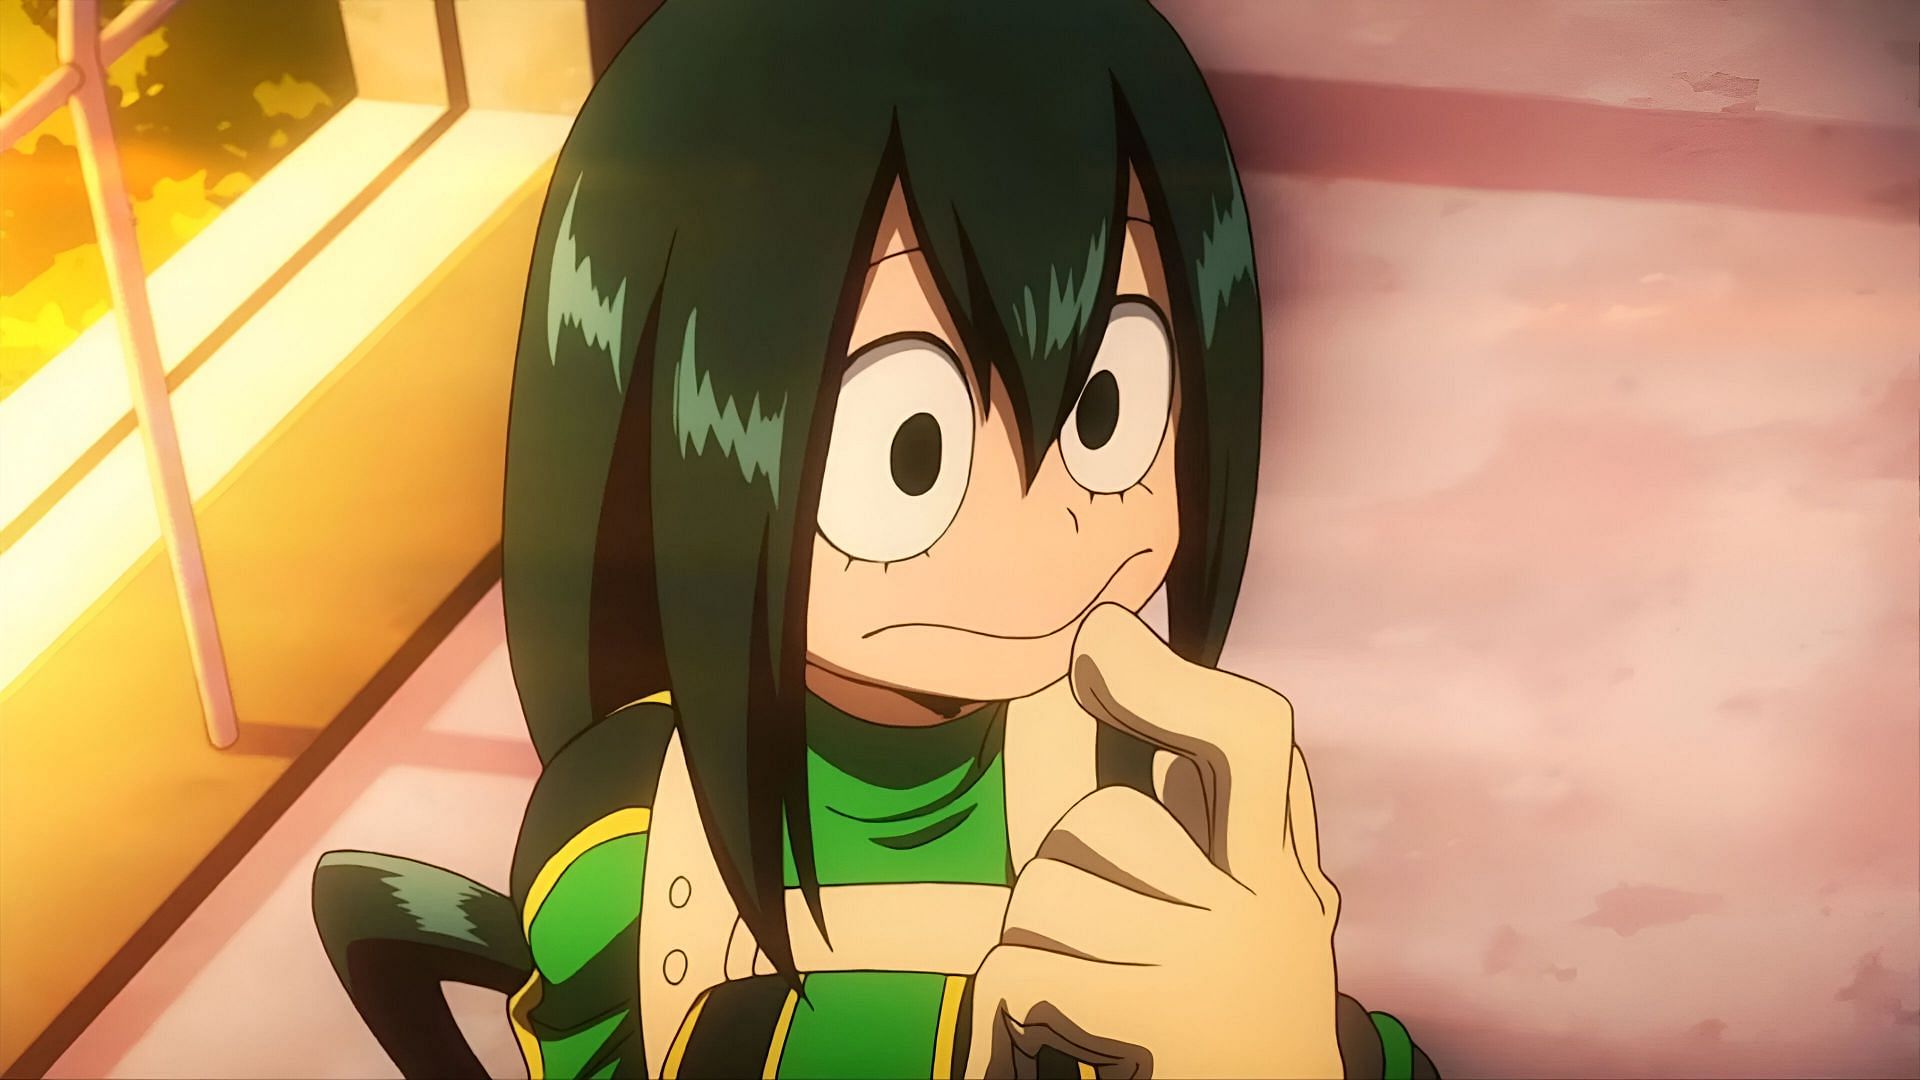 Horikoshi fumbled with Froppy in My Hero Academia and it